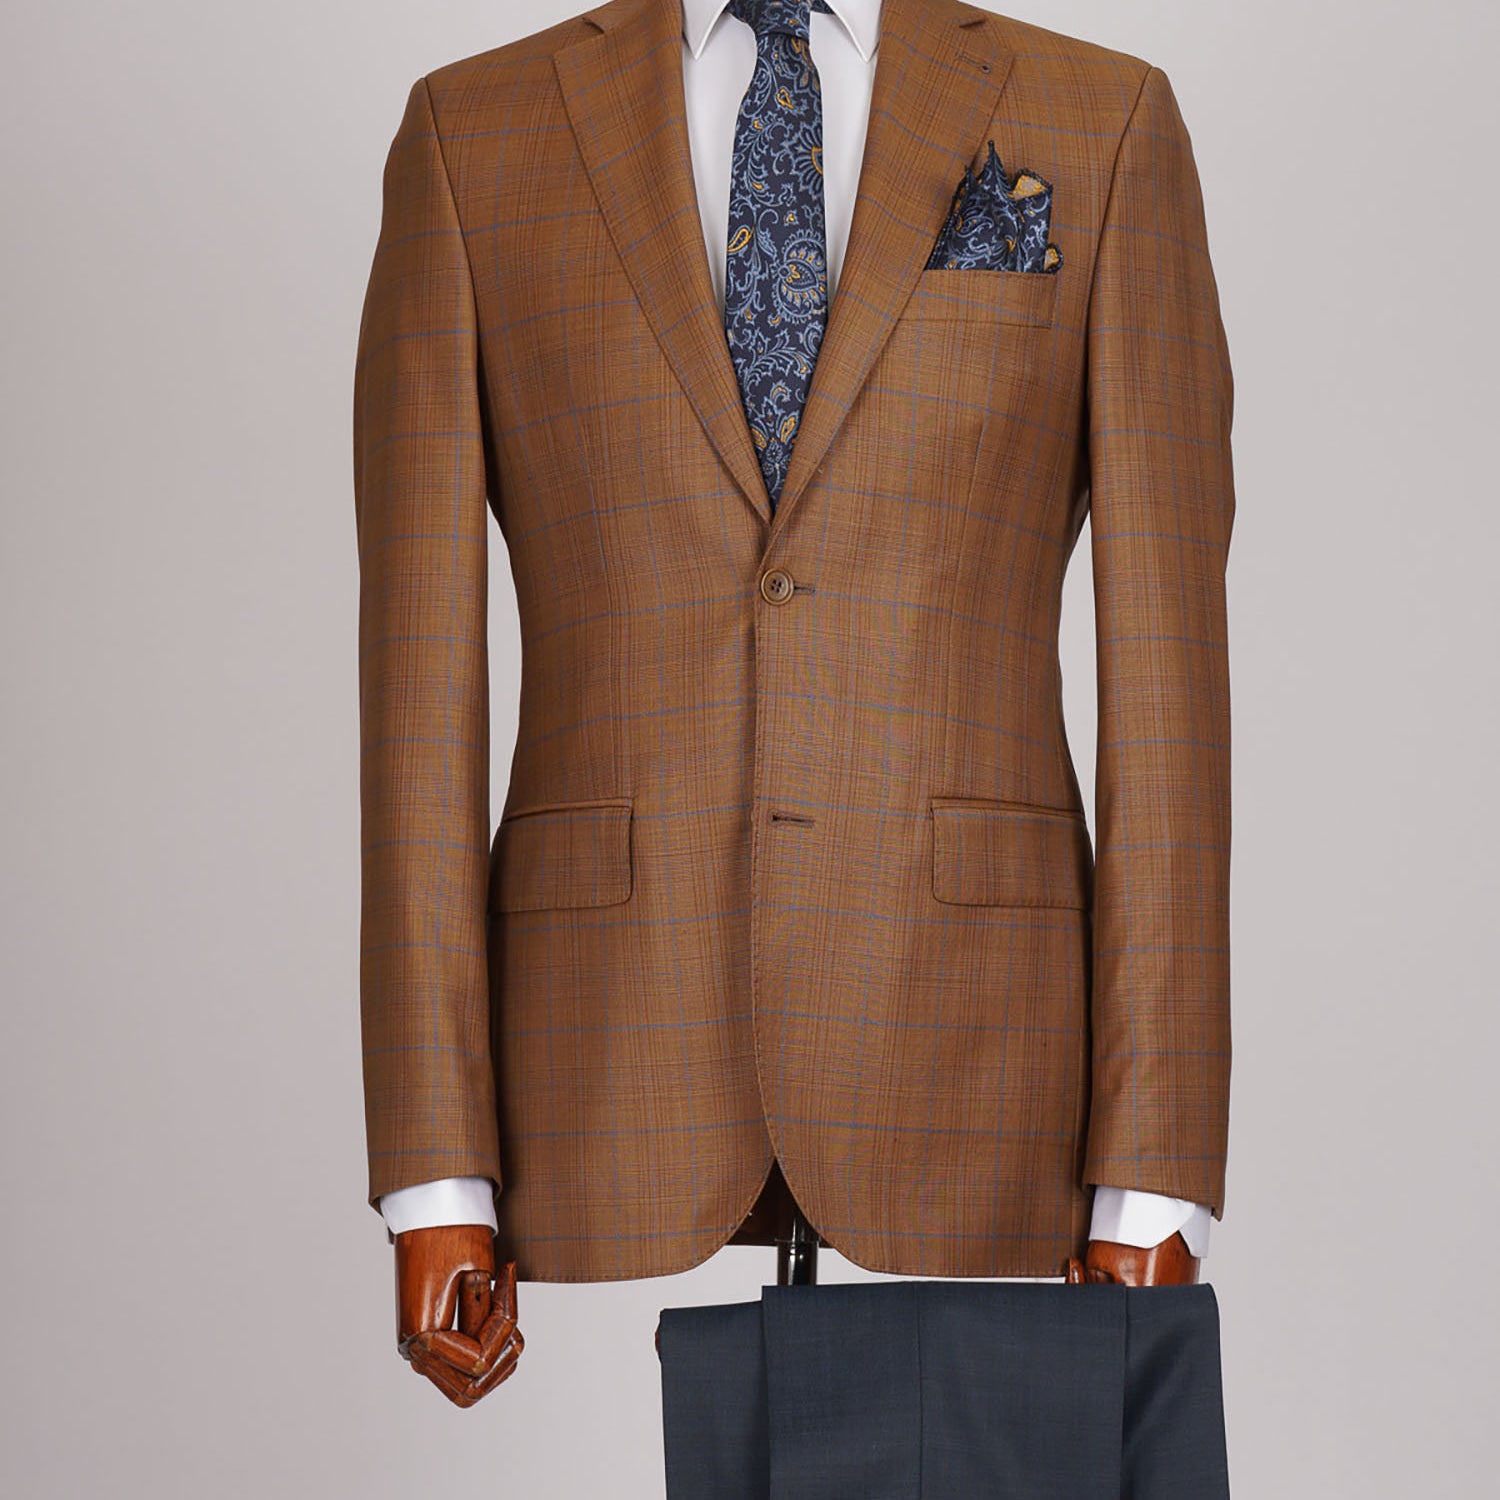 Mid Slim Two Button Wool Jacket in Checked Design